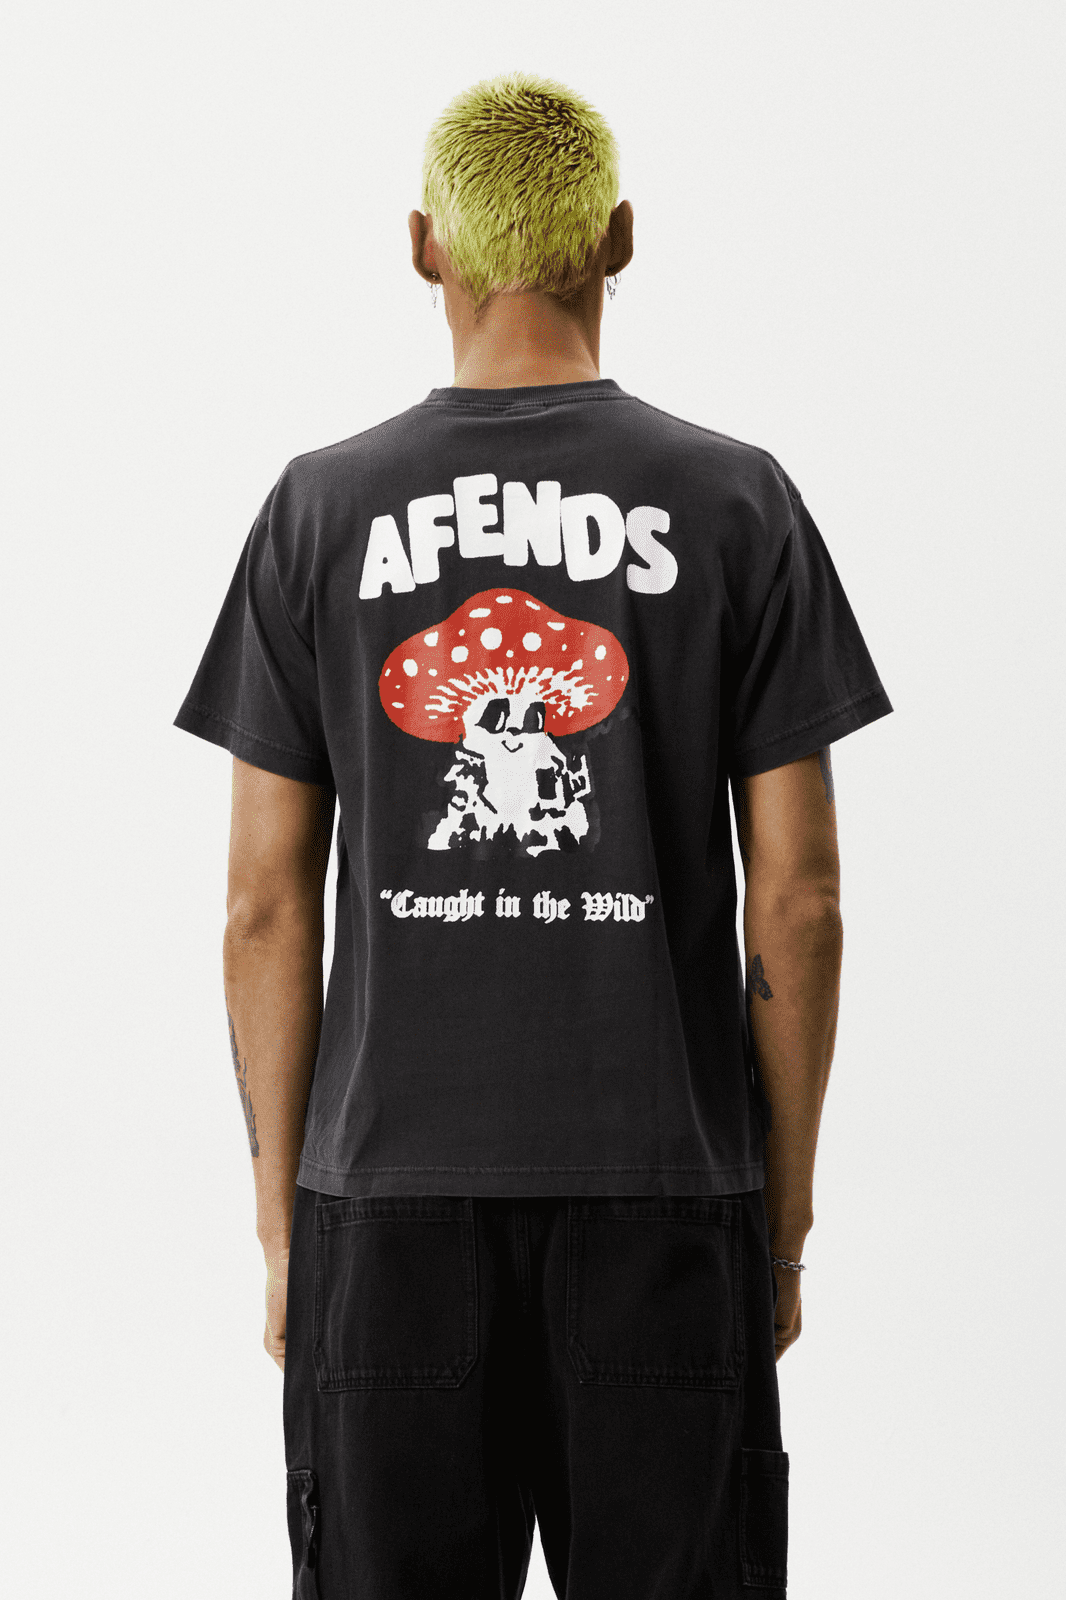 Afends caught in the wild - recycled oversized graphic t-shirt - stone black